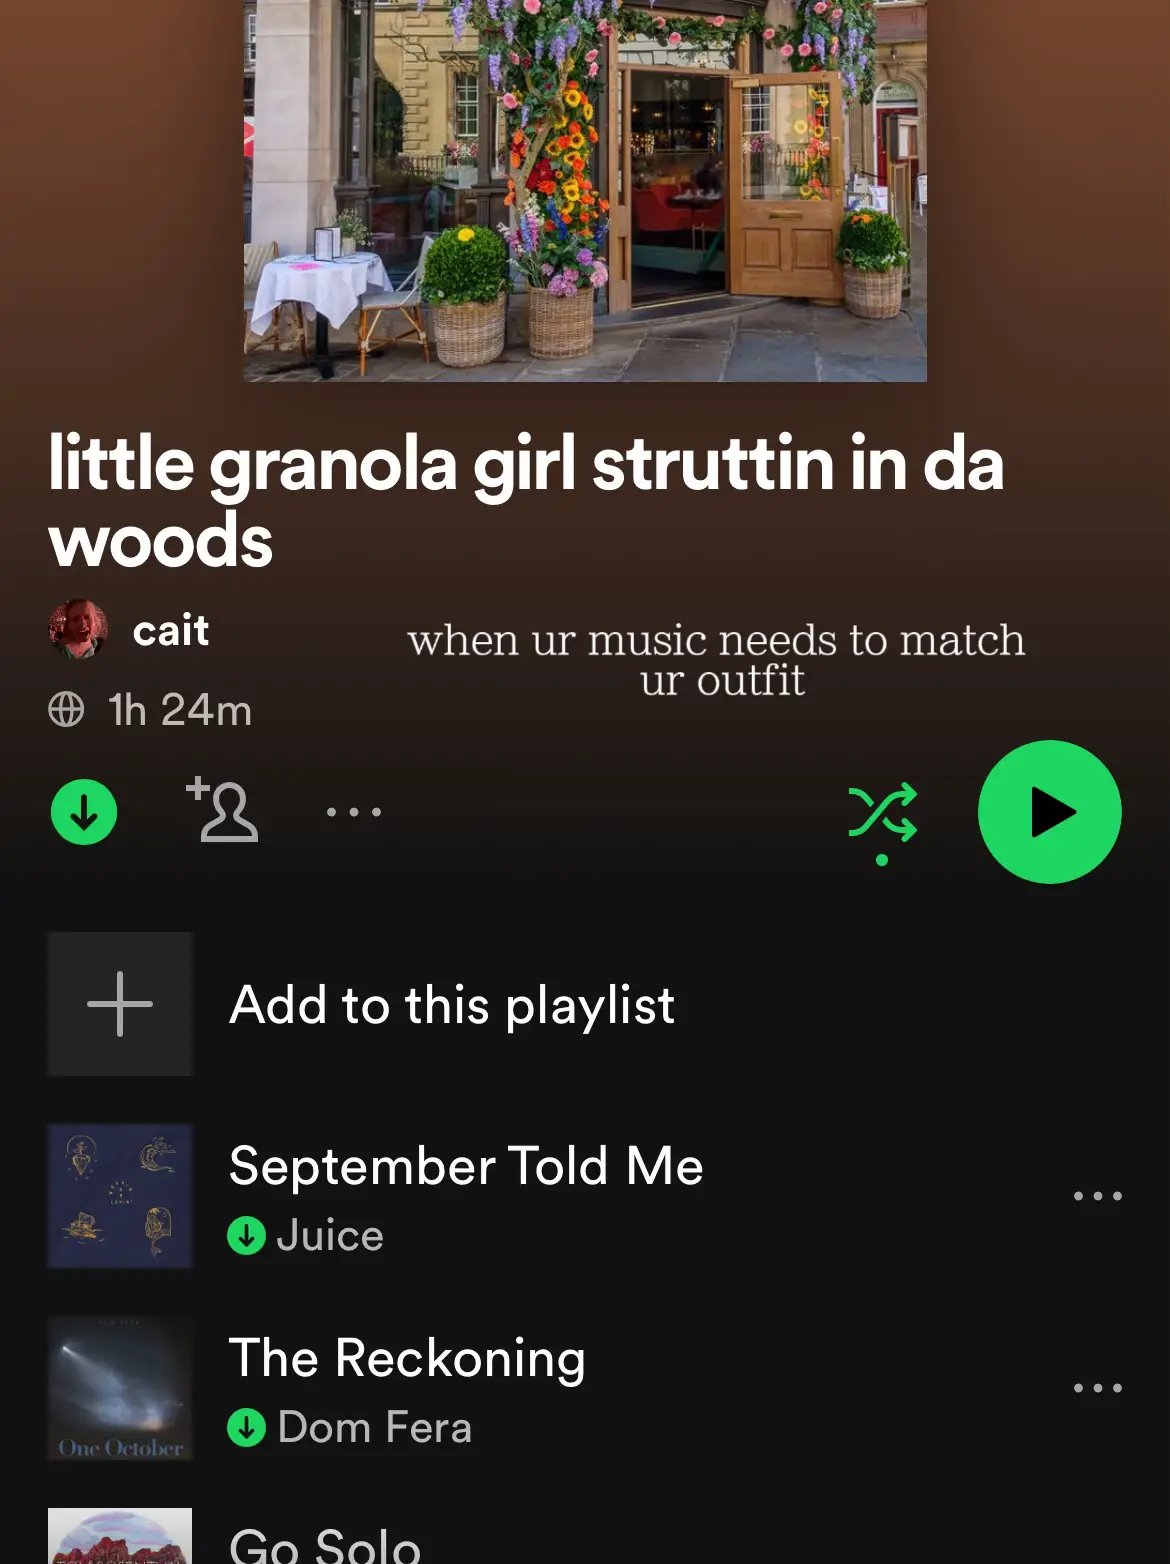  A playlist of music with a